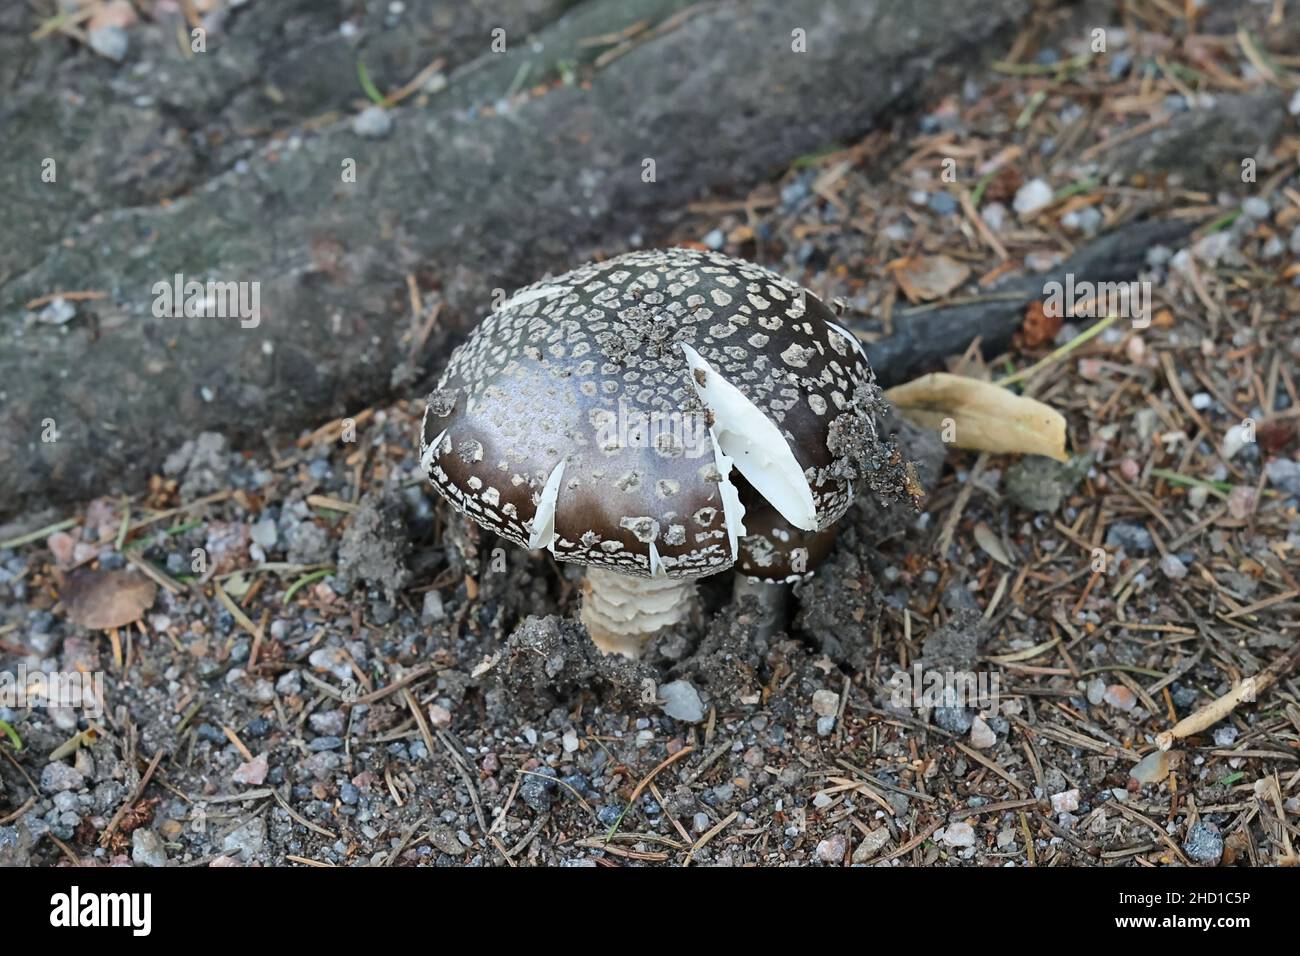 Amanita excelsa, known as Grey Spotted Amanita or European False Blusher, wild mushroom from Finland Stock Photo